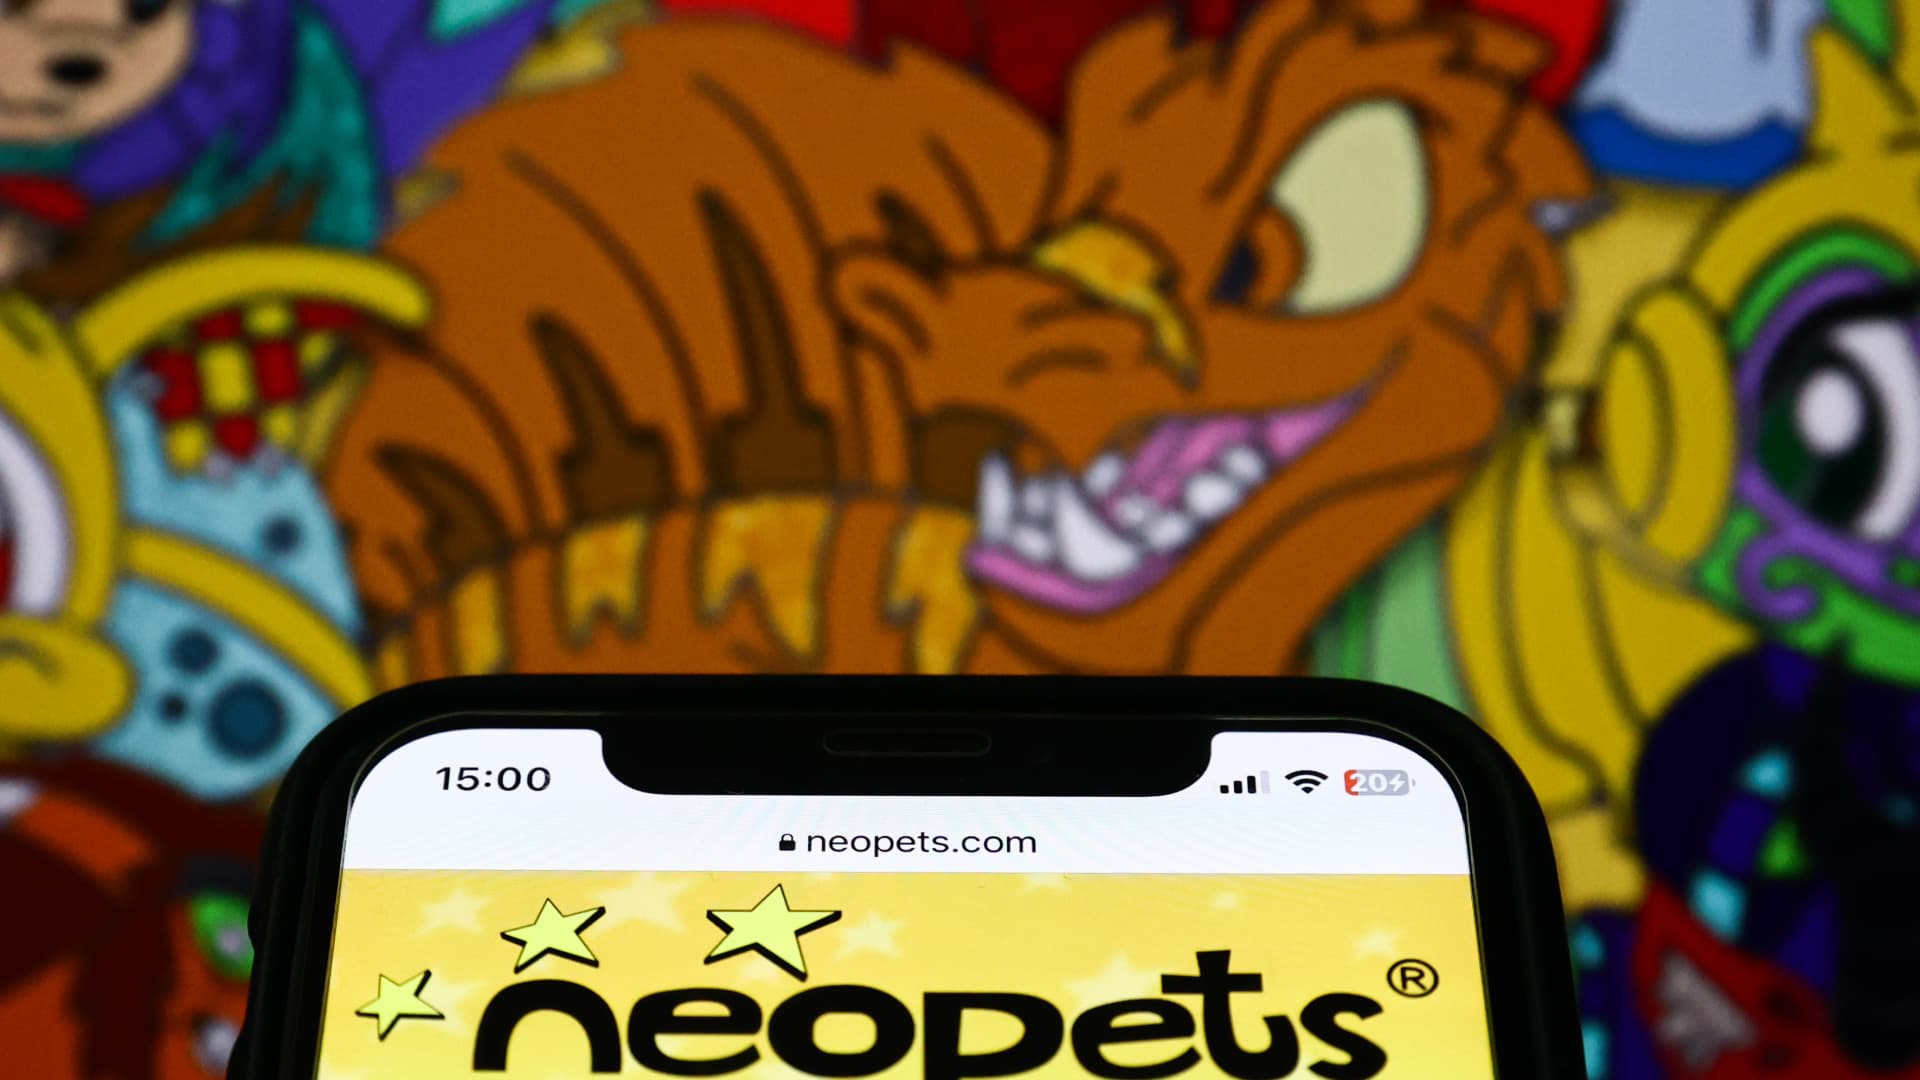 Neopets plans comeback in a vastly different era of gaming